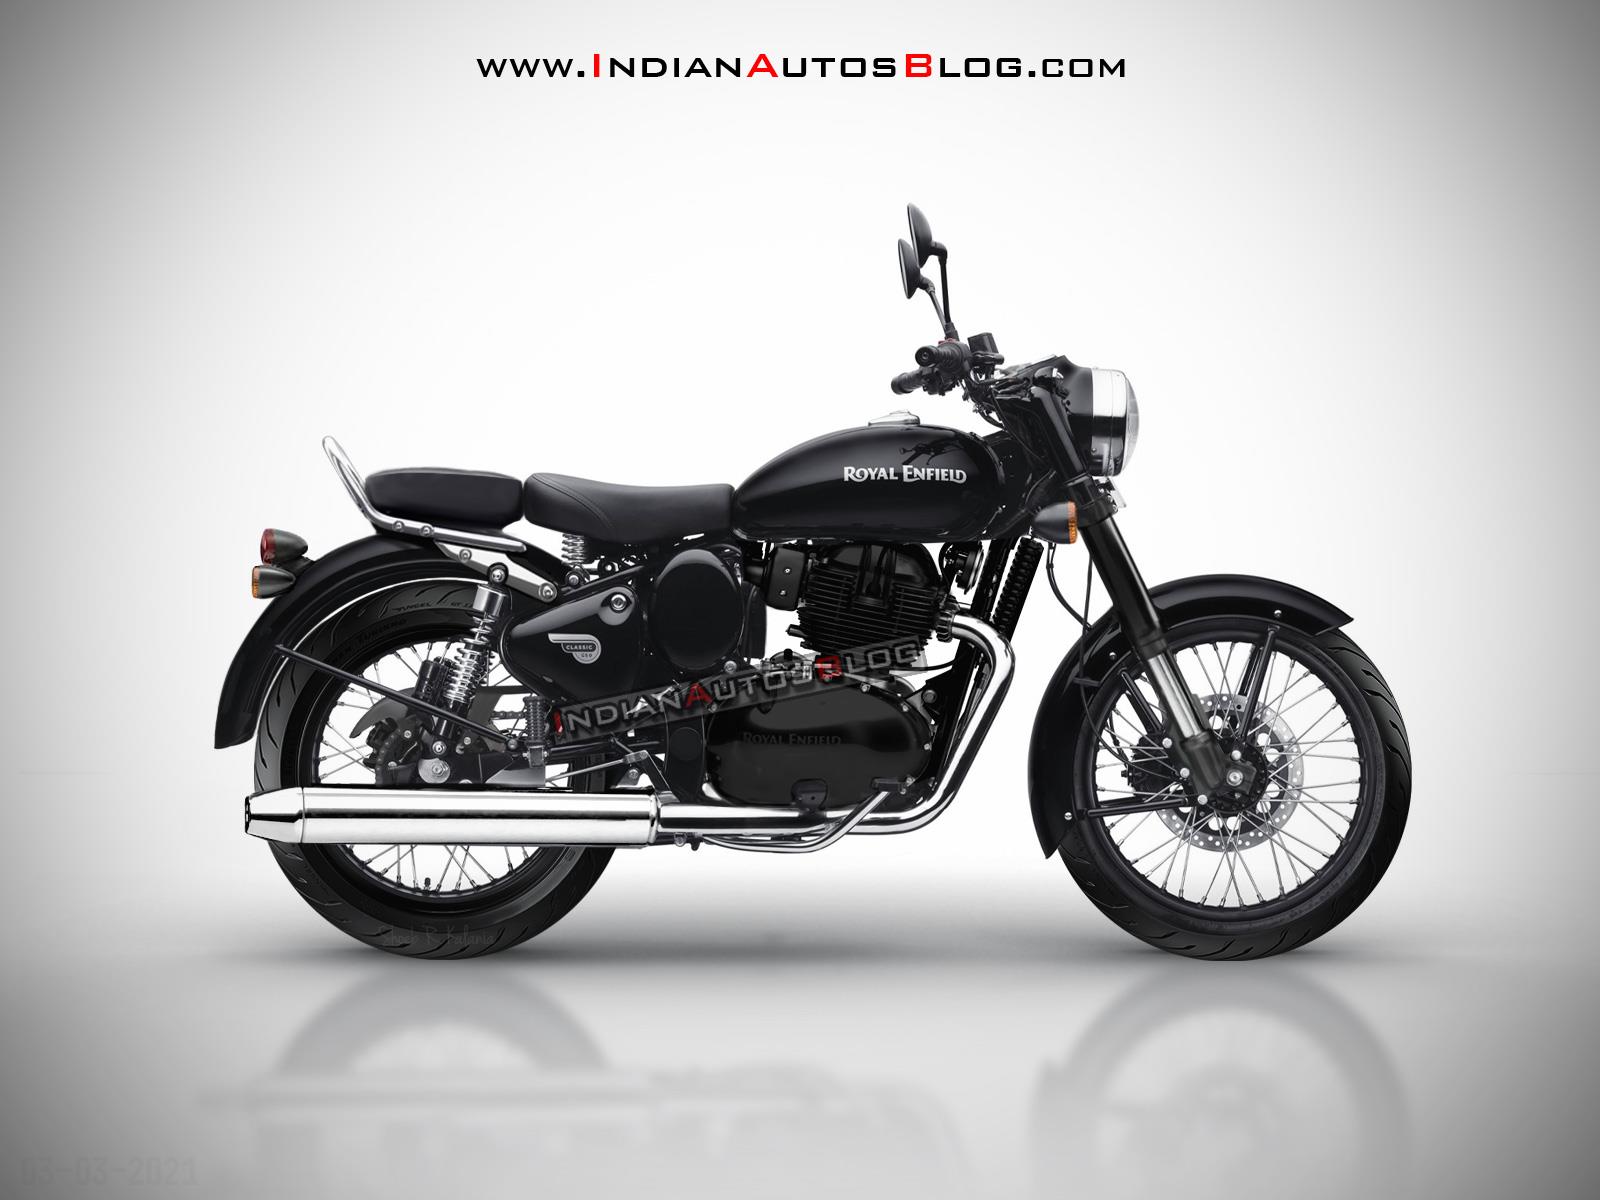 2023 Royal Enfield Classic 650 Specifications and Expected Price in India